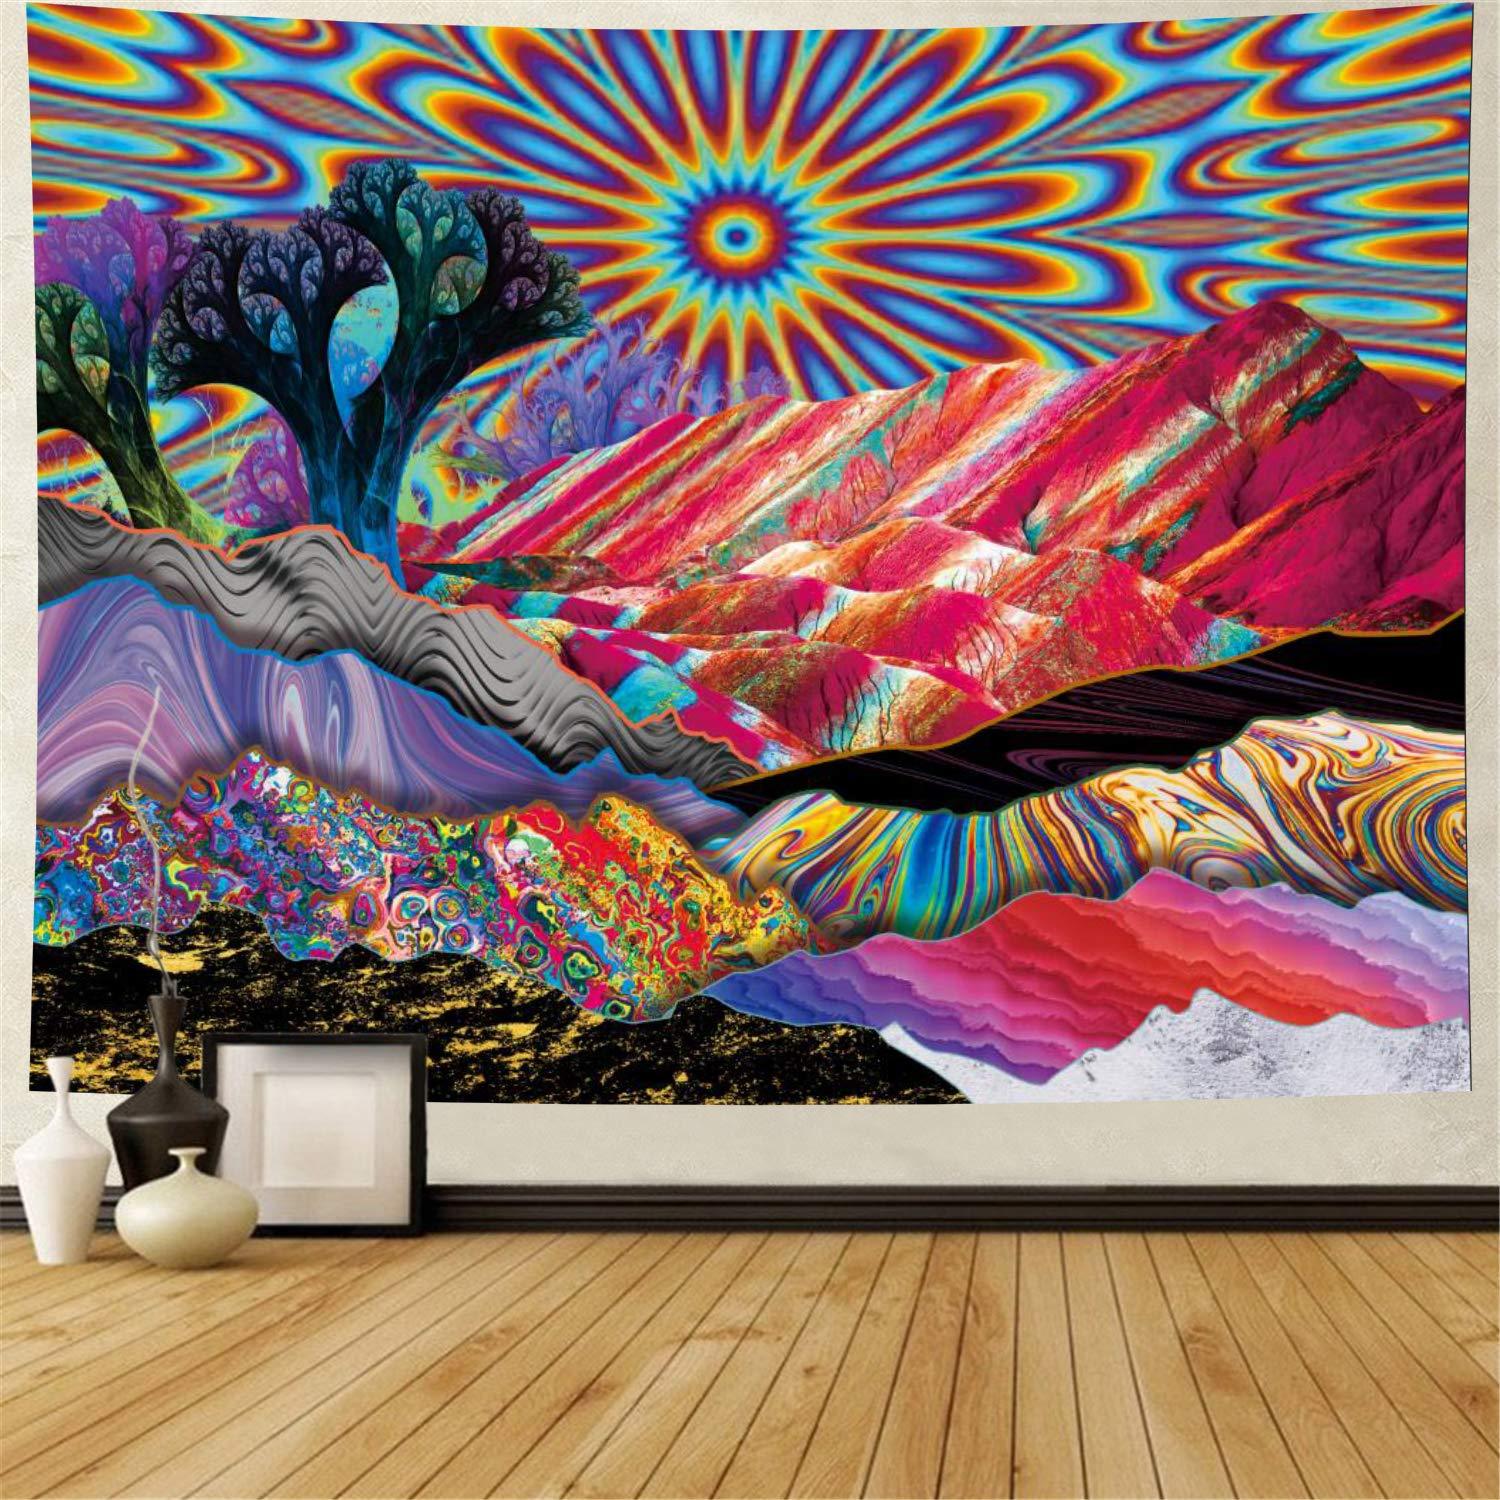 Trippy Mountain & Sun Tapestry - The Tapestry Store Company